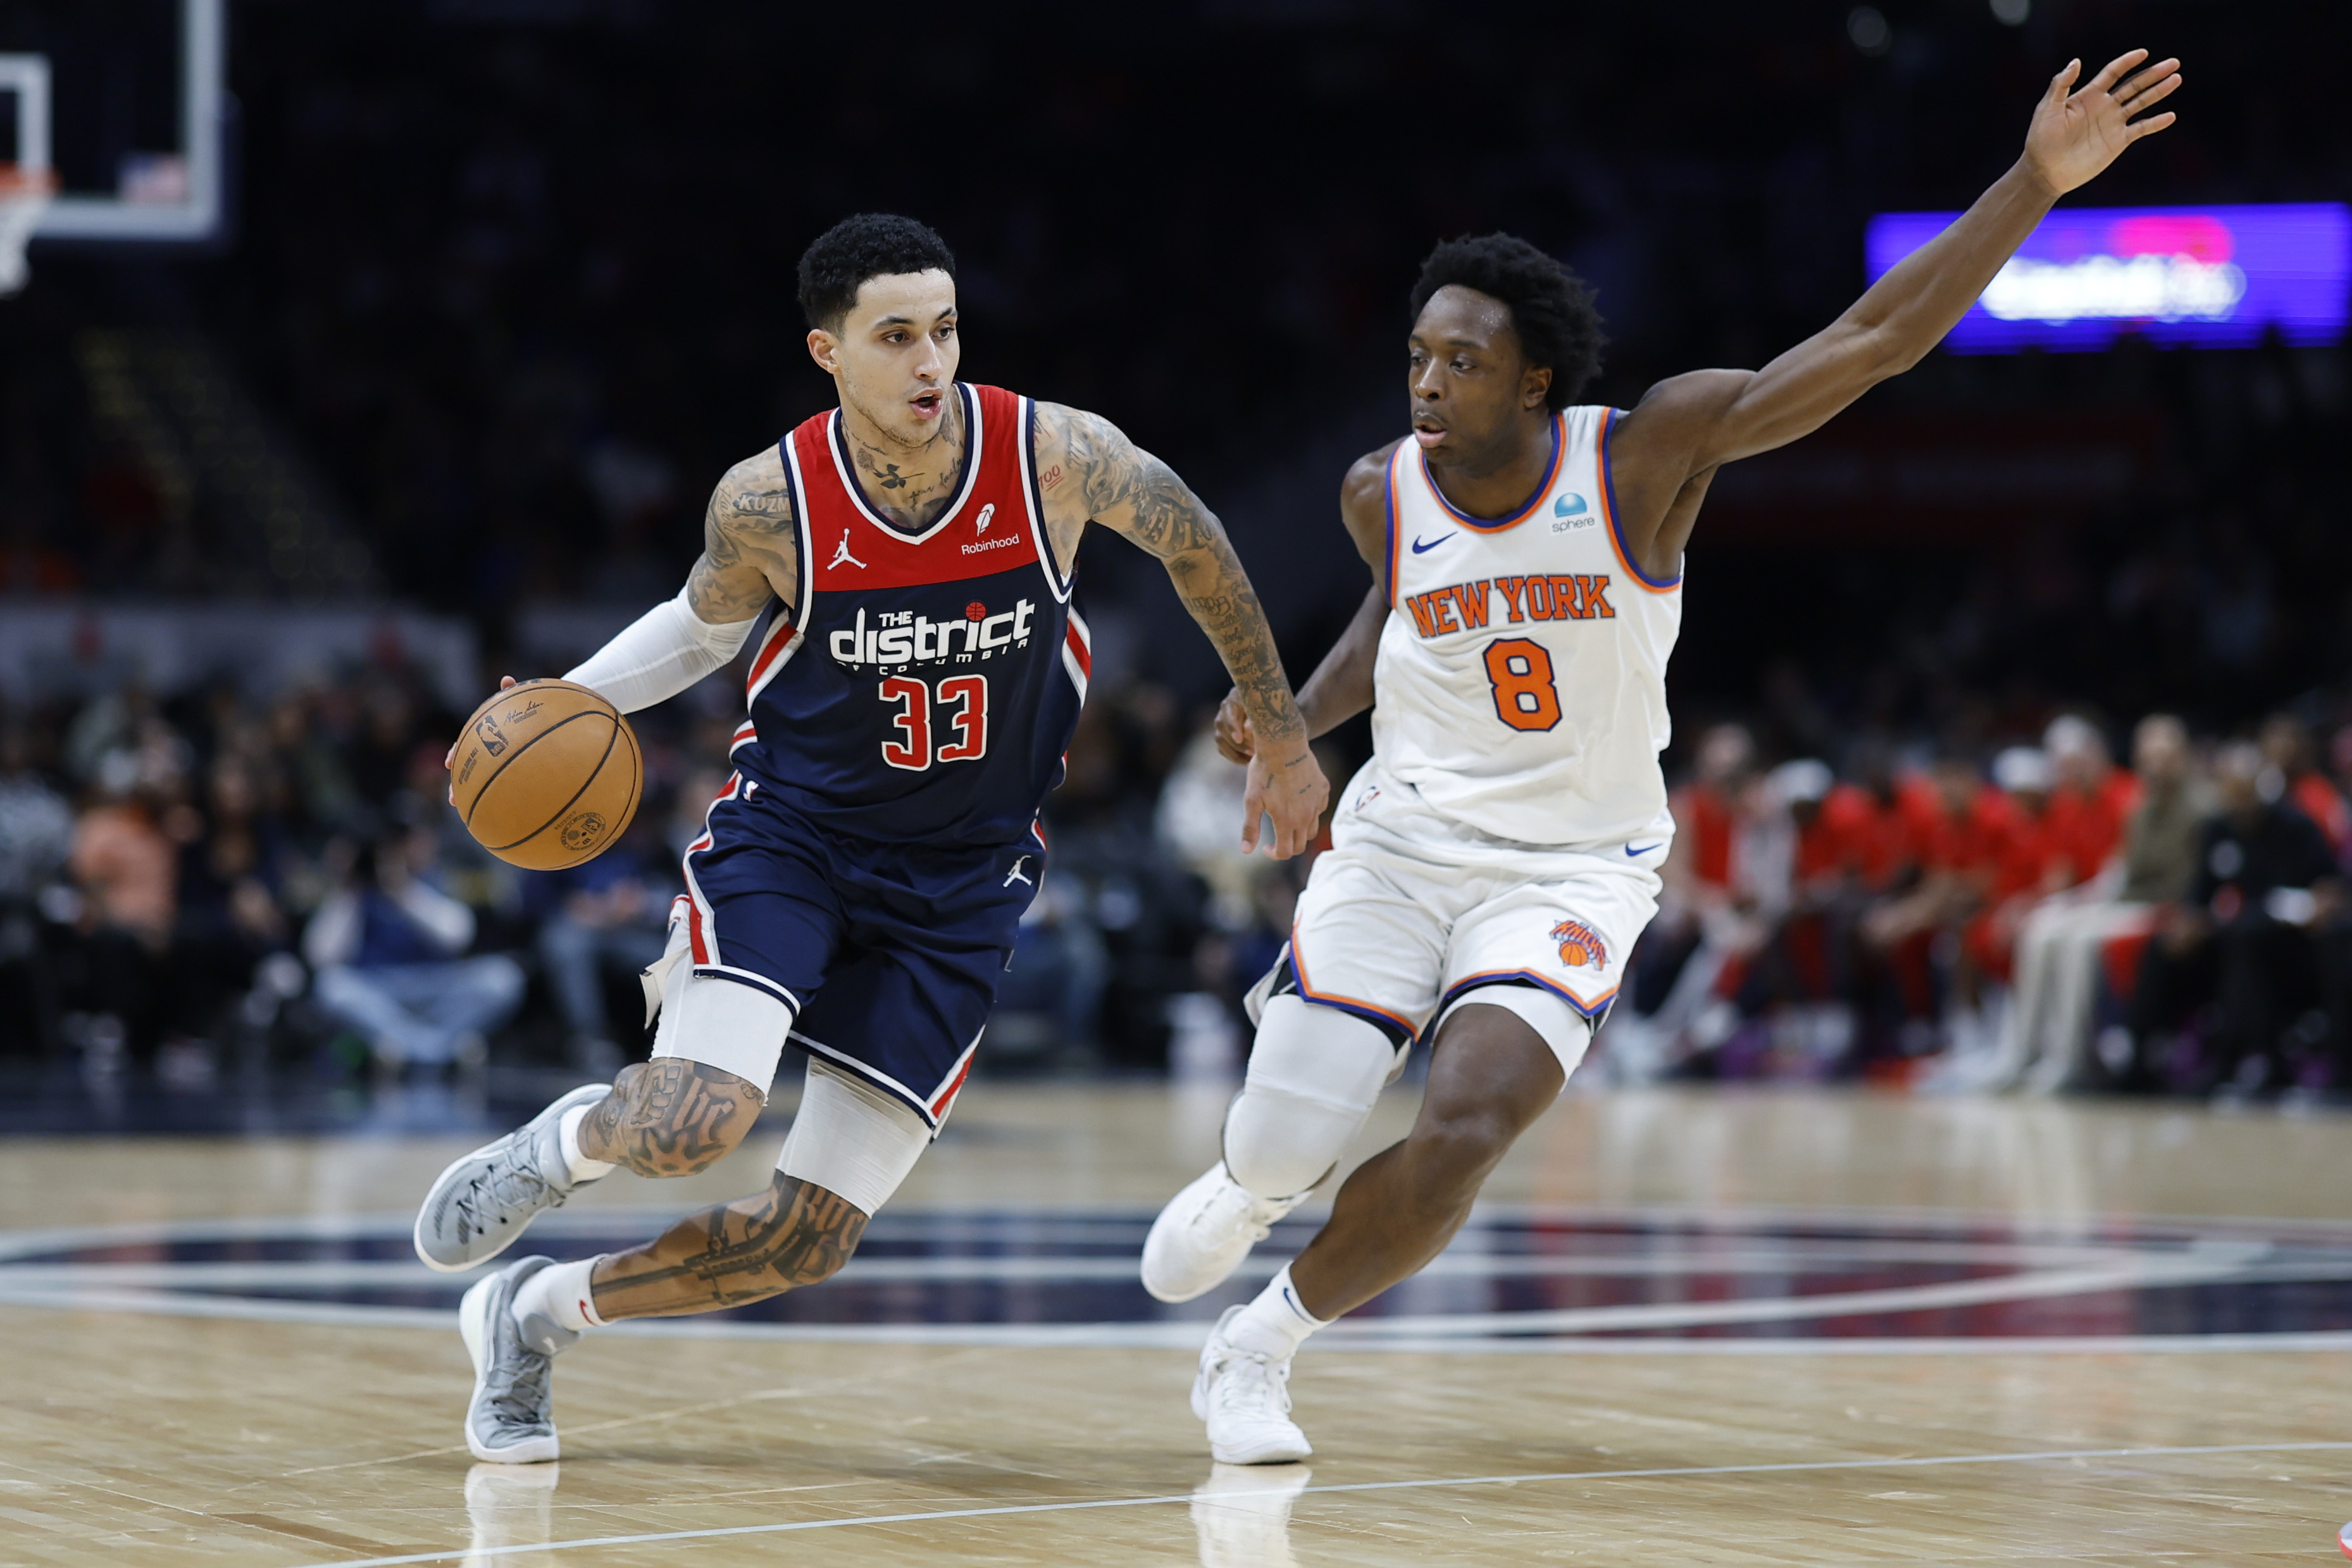 Washington Wizards forward Kyle Kuzma (33) drives to the basket as New York Knicks forward OG Anunoby (8) defends in the third quarter at Capital One Arena